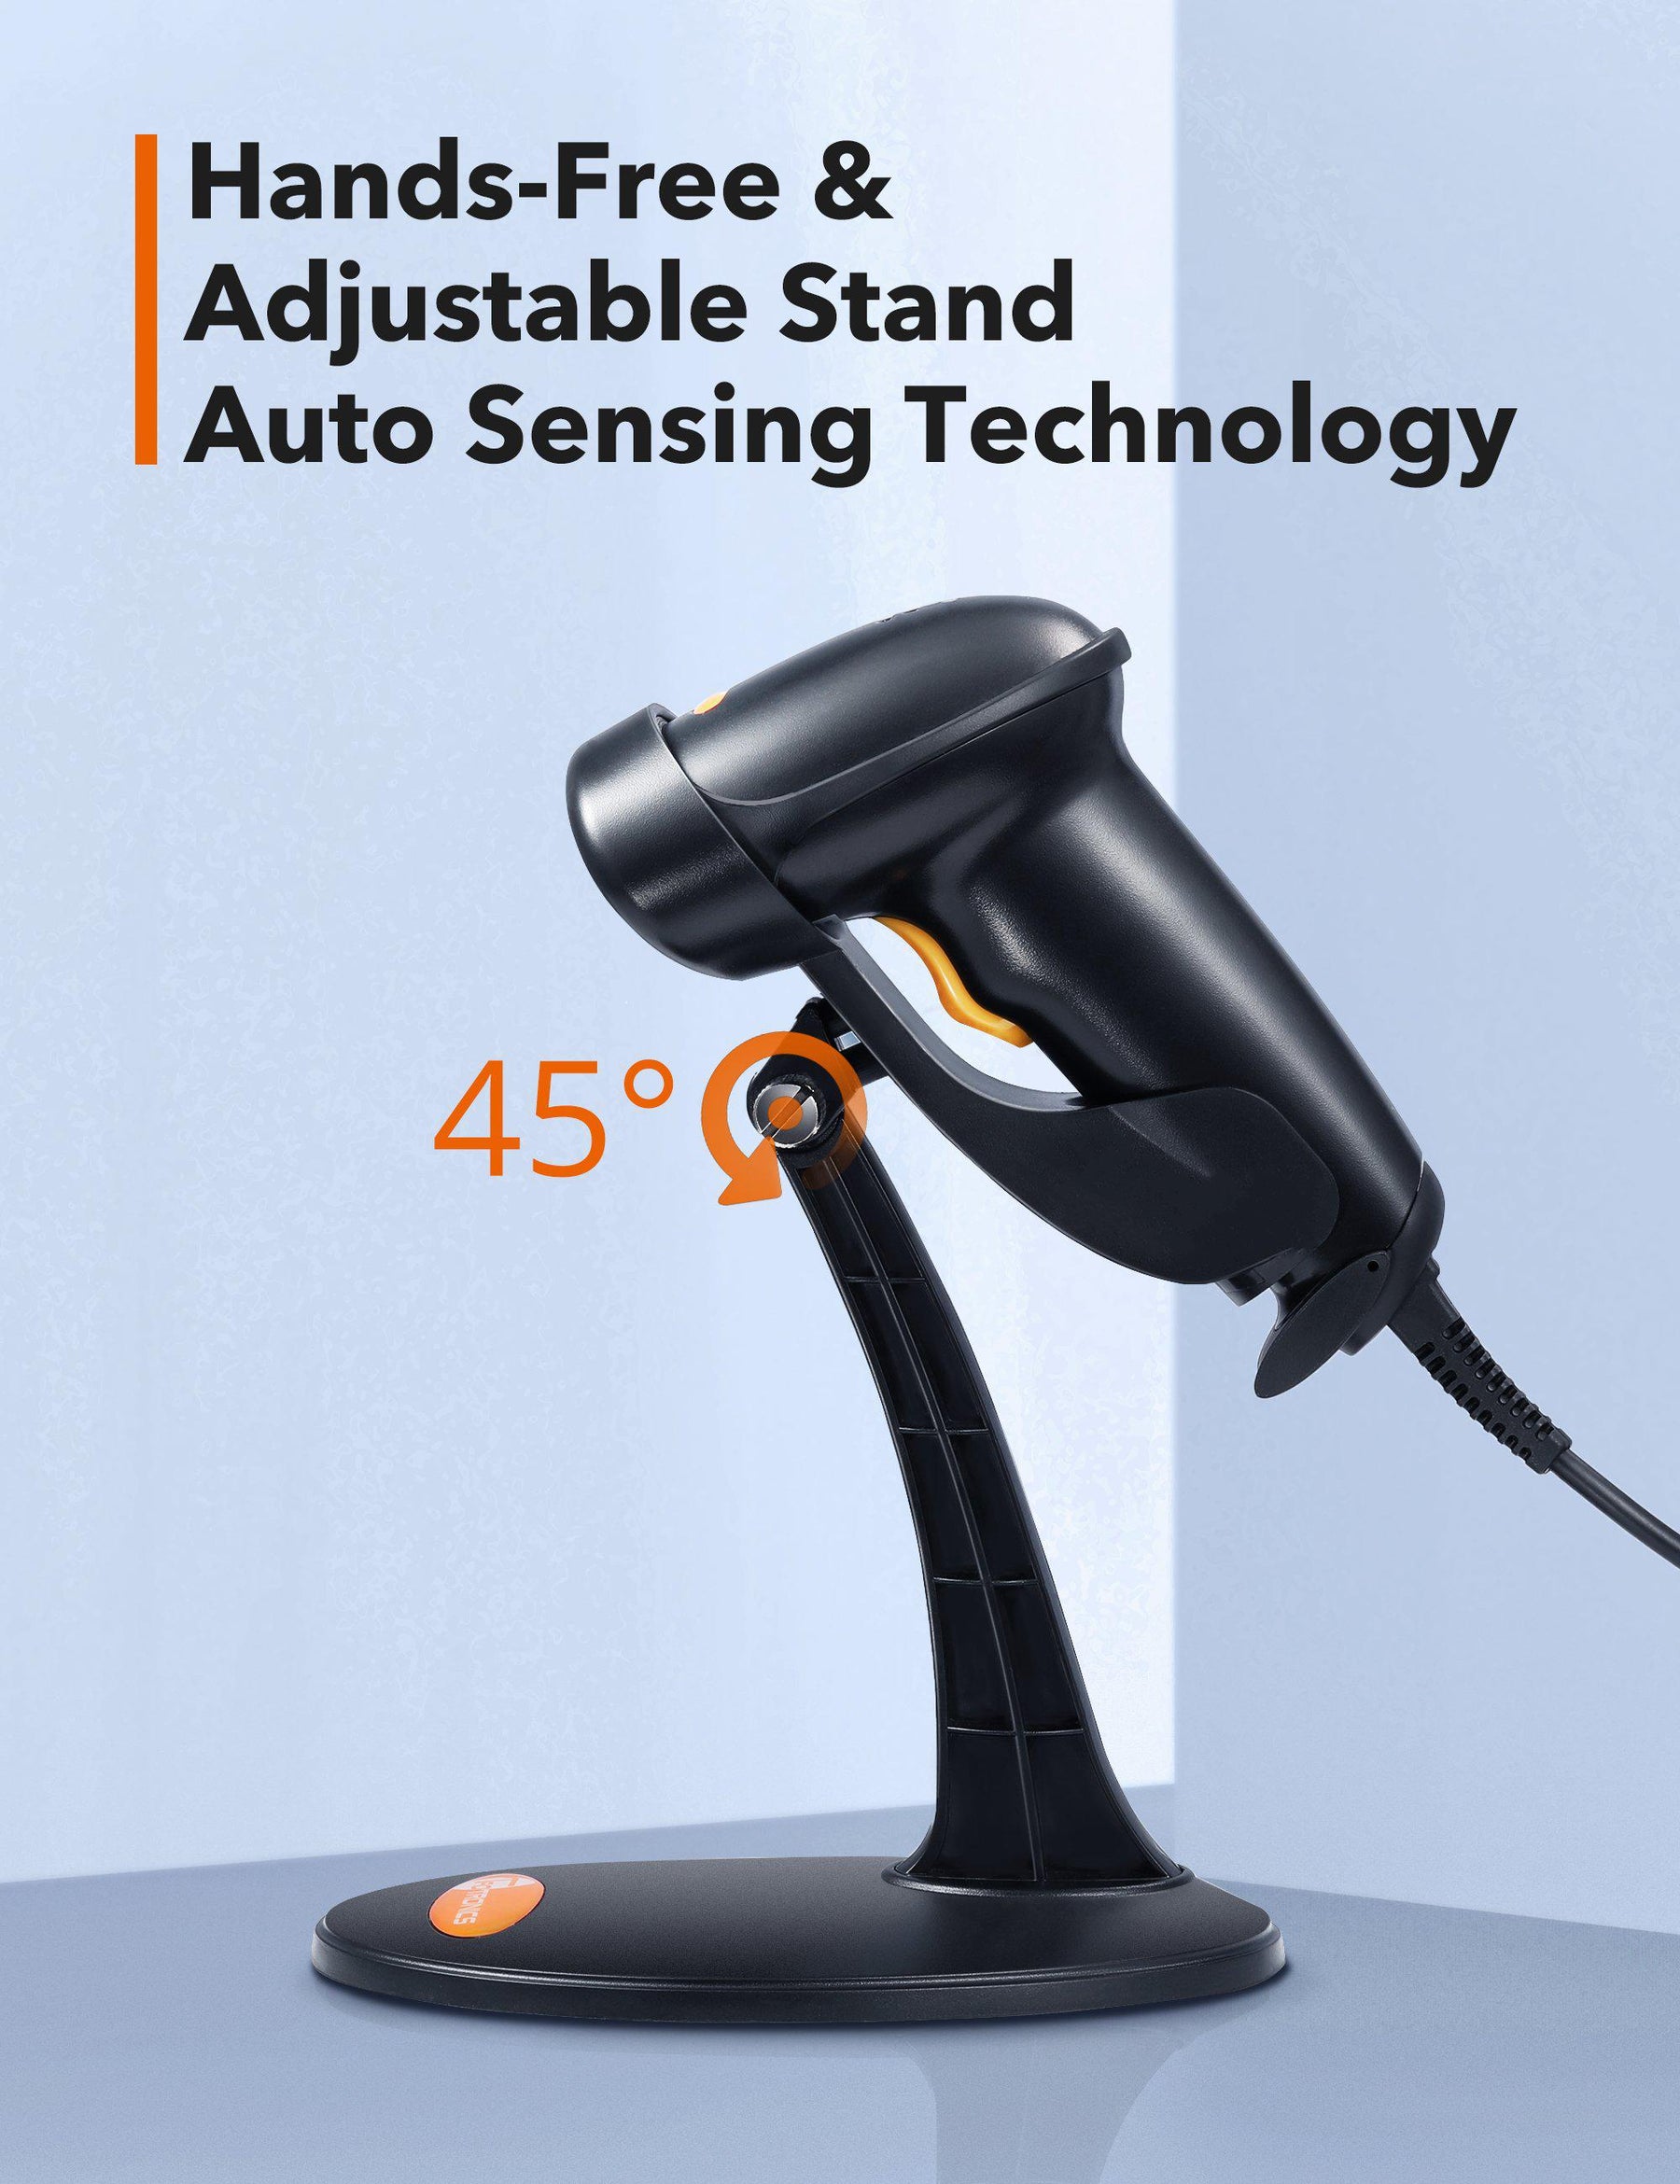 General Purpose Hands-Free Barcode Scanners